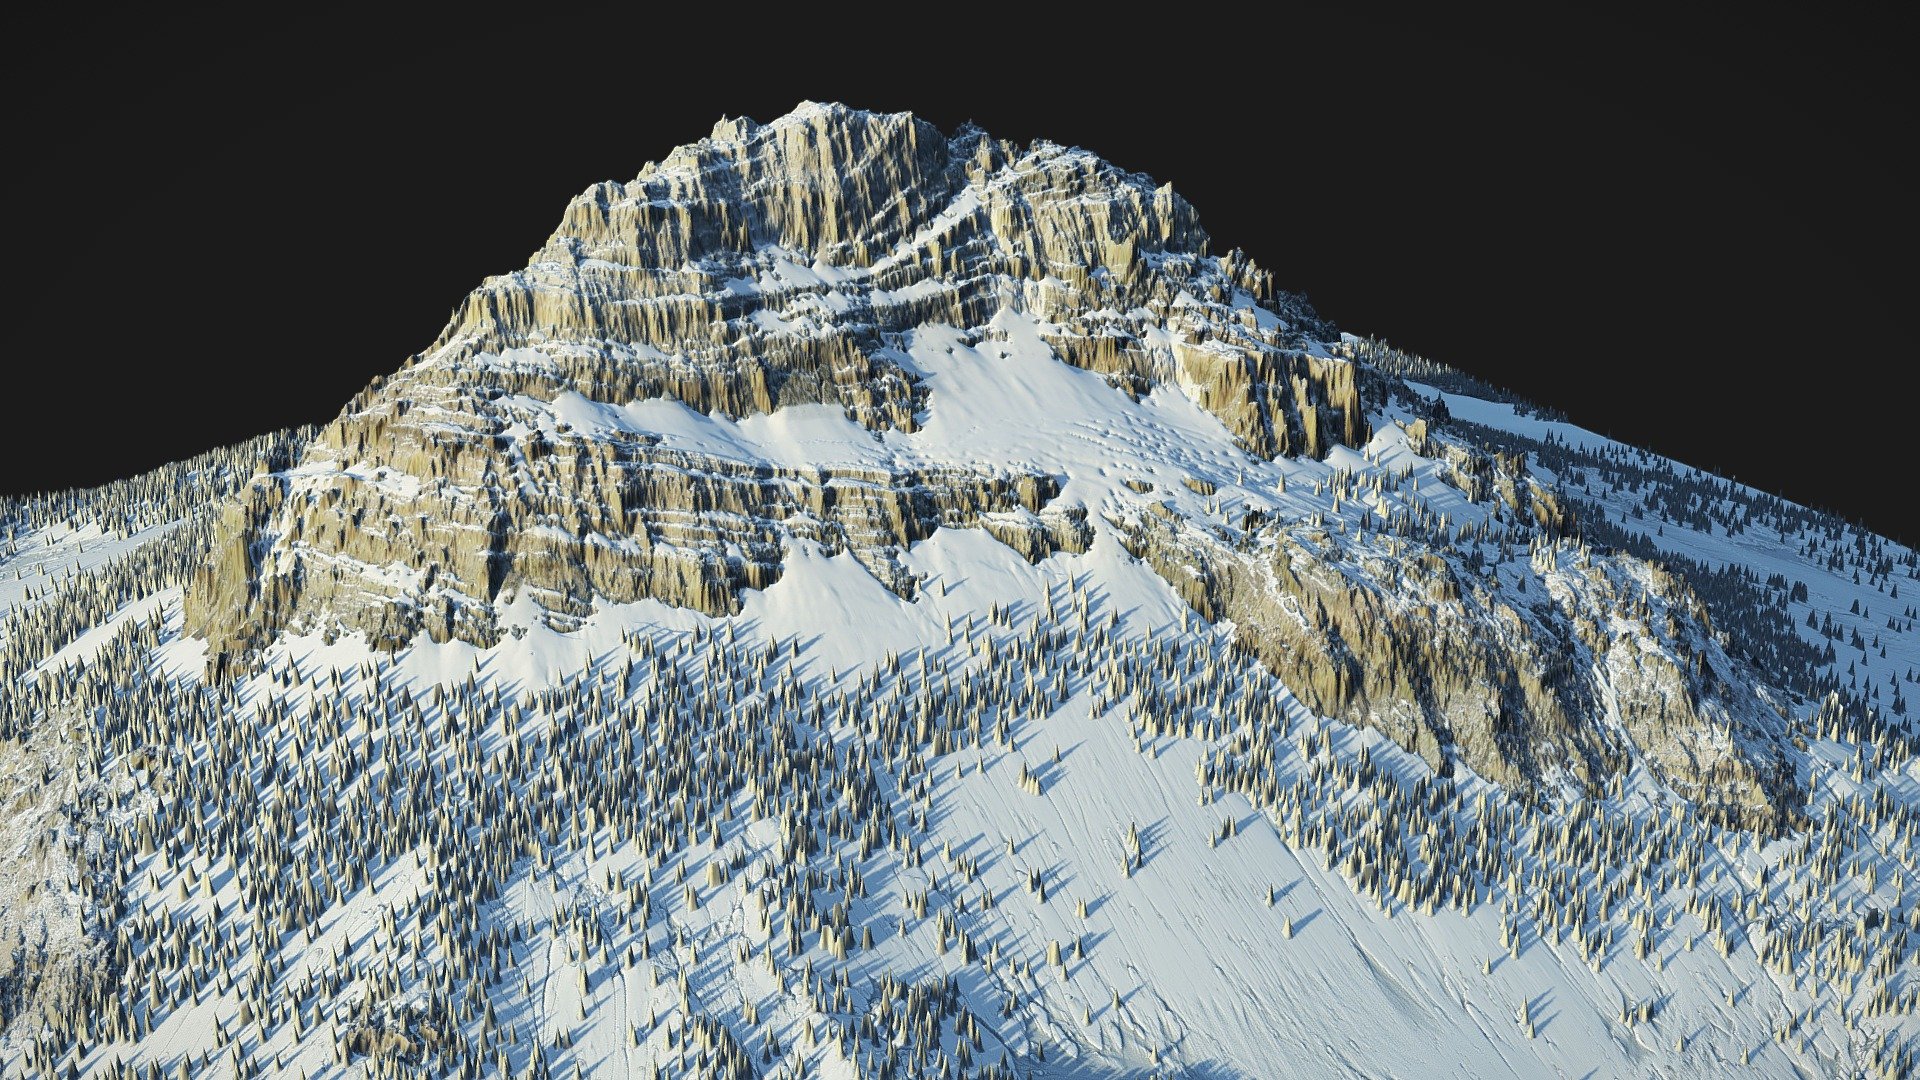 Fully Procedural Landscape created in World Machine. Inspired by winter.

included 4k textures - COLOR  NORMAL  LIGHT_1  LIGHT_2

Other assets on https://gamewarming.com/ - Winter Mountain (World Machine) - Buy Royalty Free 3D model by gamewarming 3d model